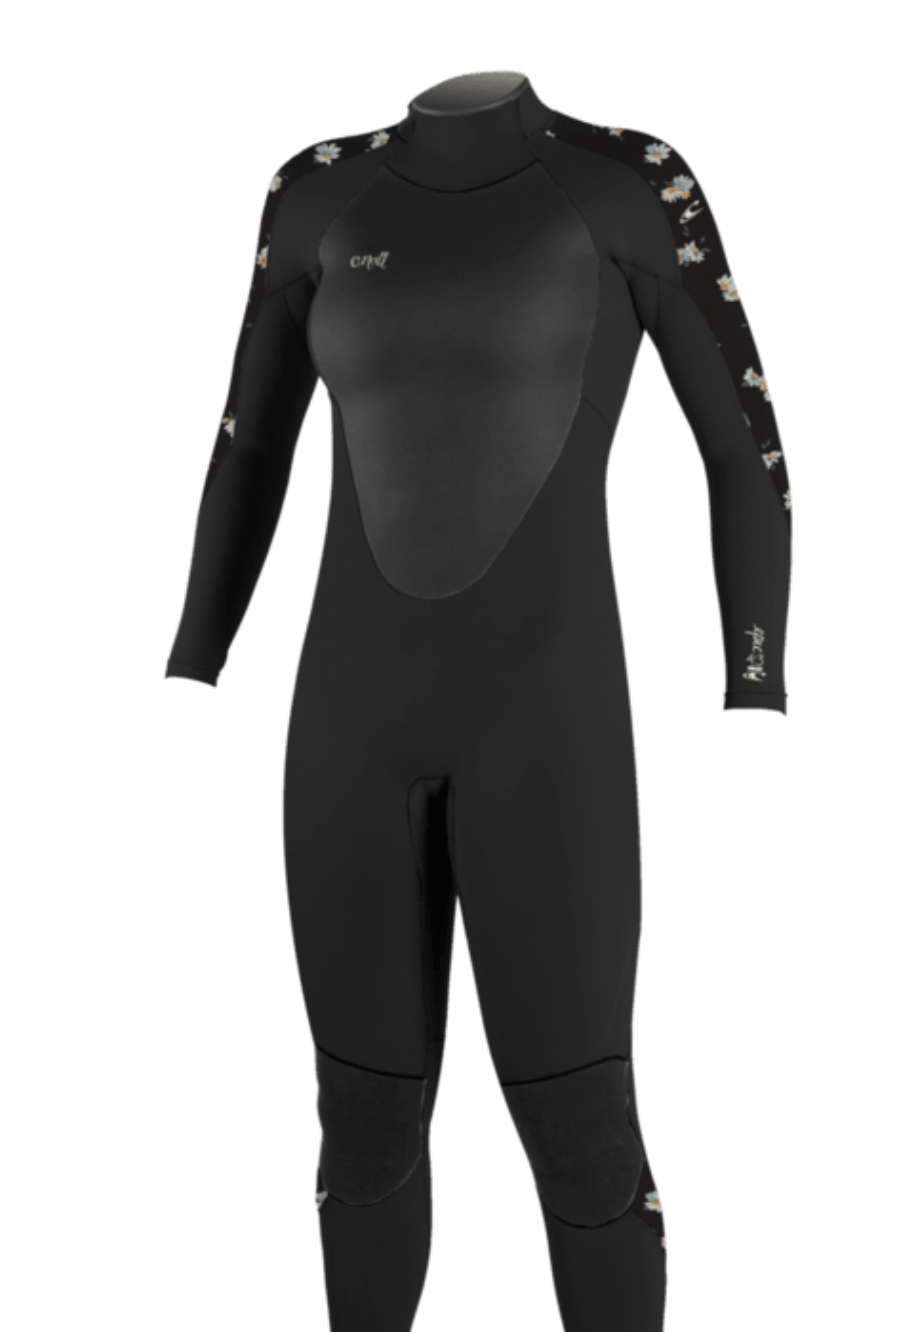 O'NEILL EPIC 4/3MM WOMENS BACK ZIP WETSUIT - BLACK/ CINDY/DAISY 4214==SALE==